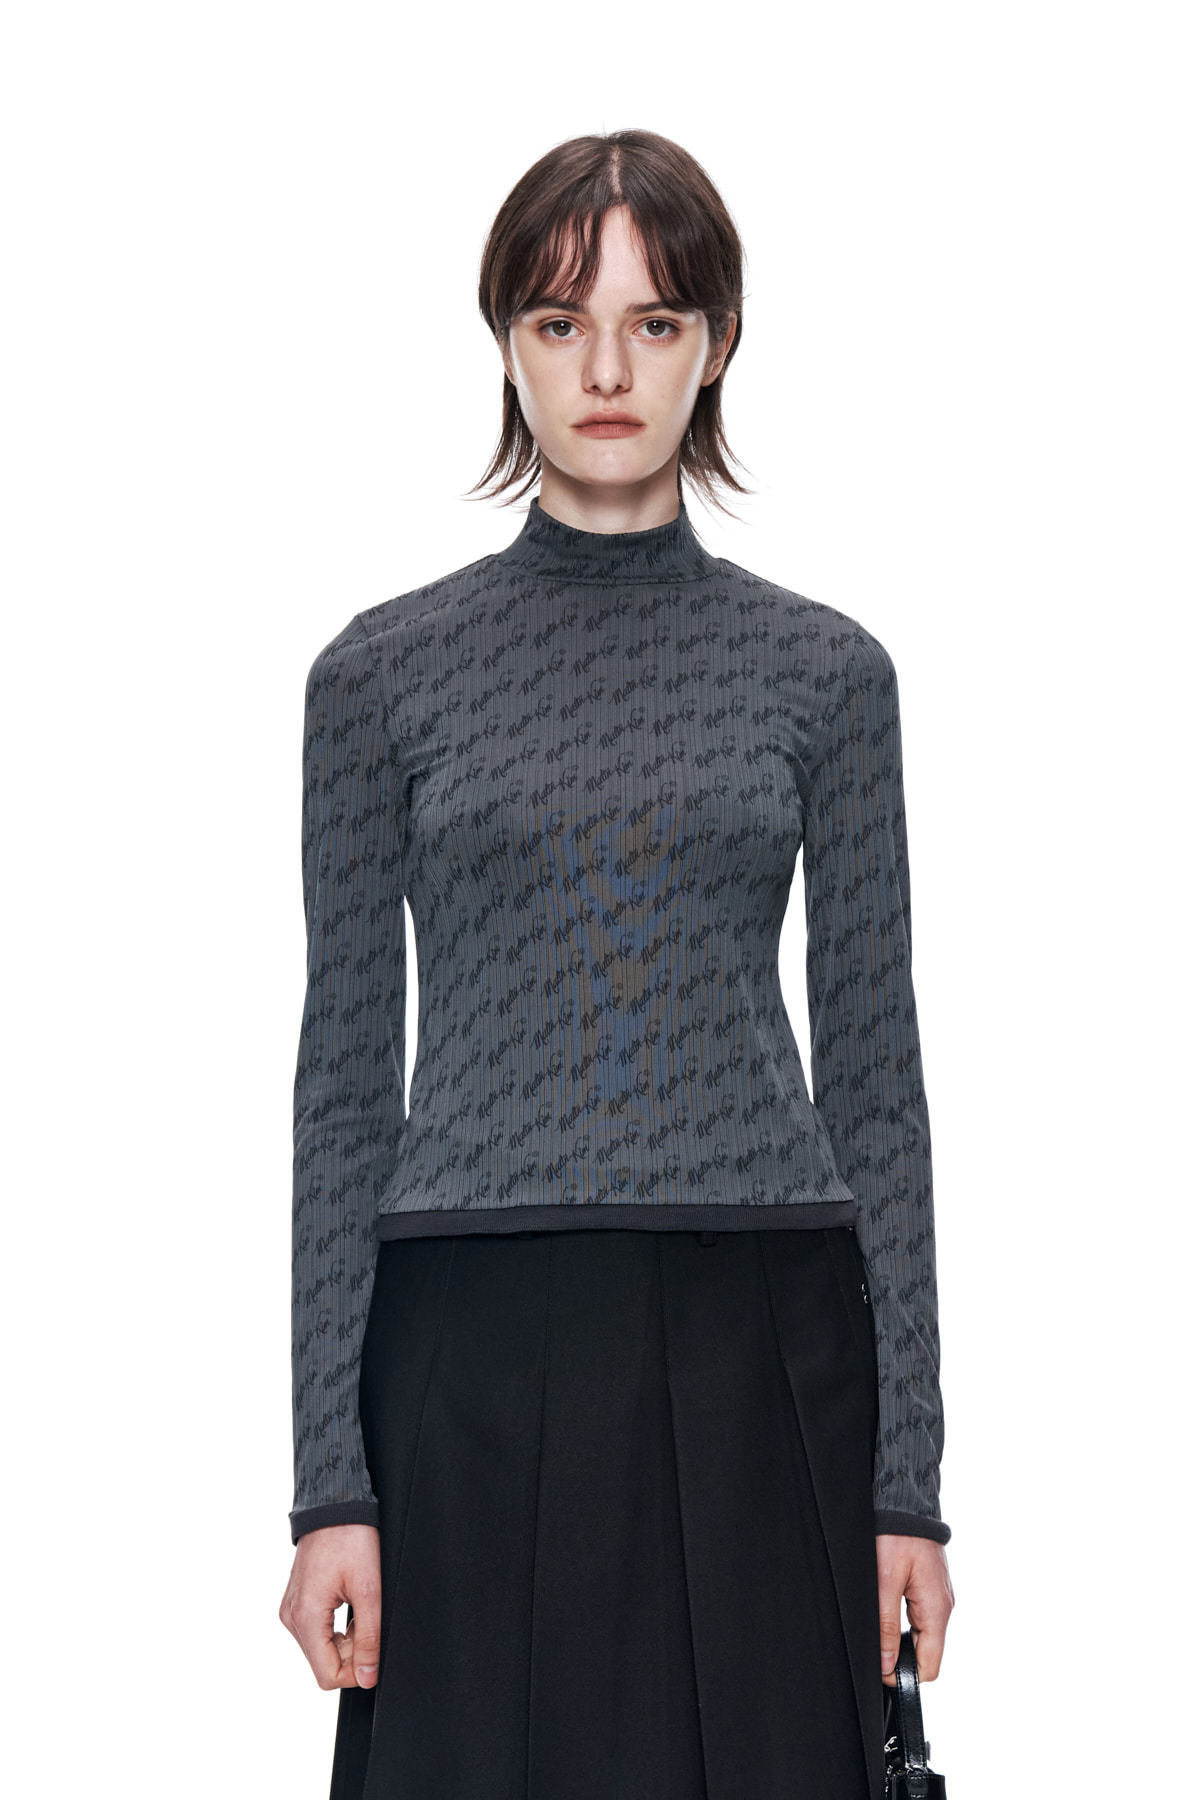 MATIN LETTERING TURTLE NECK LIGHT TOP IN CHARCOAL